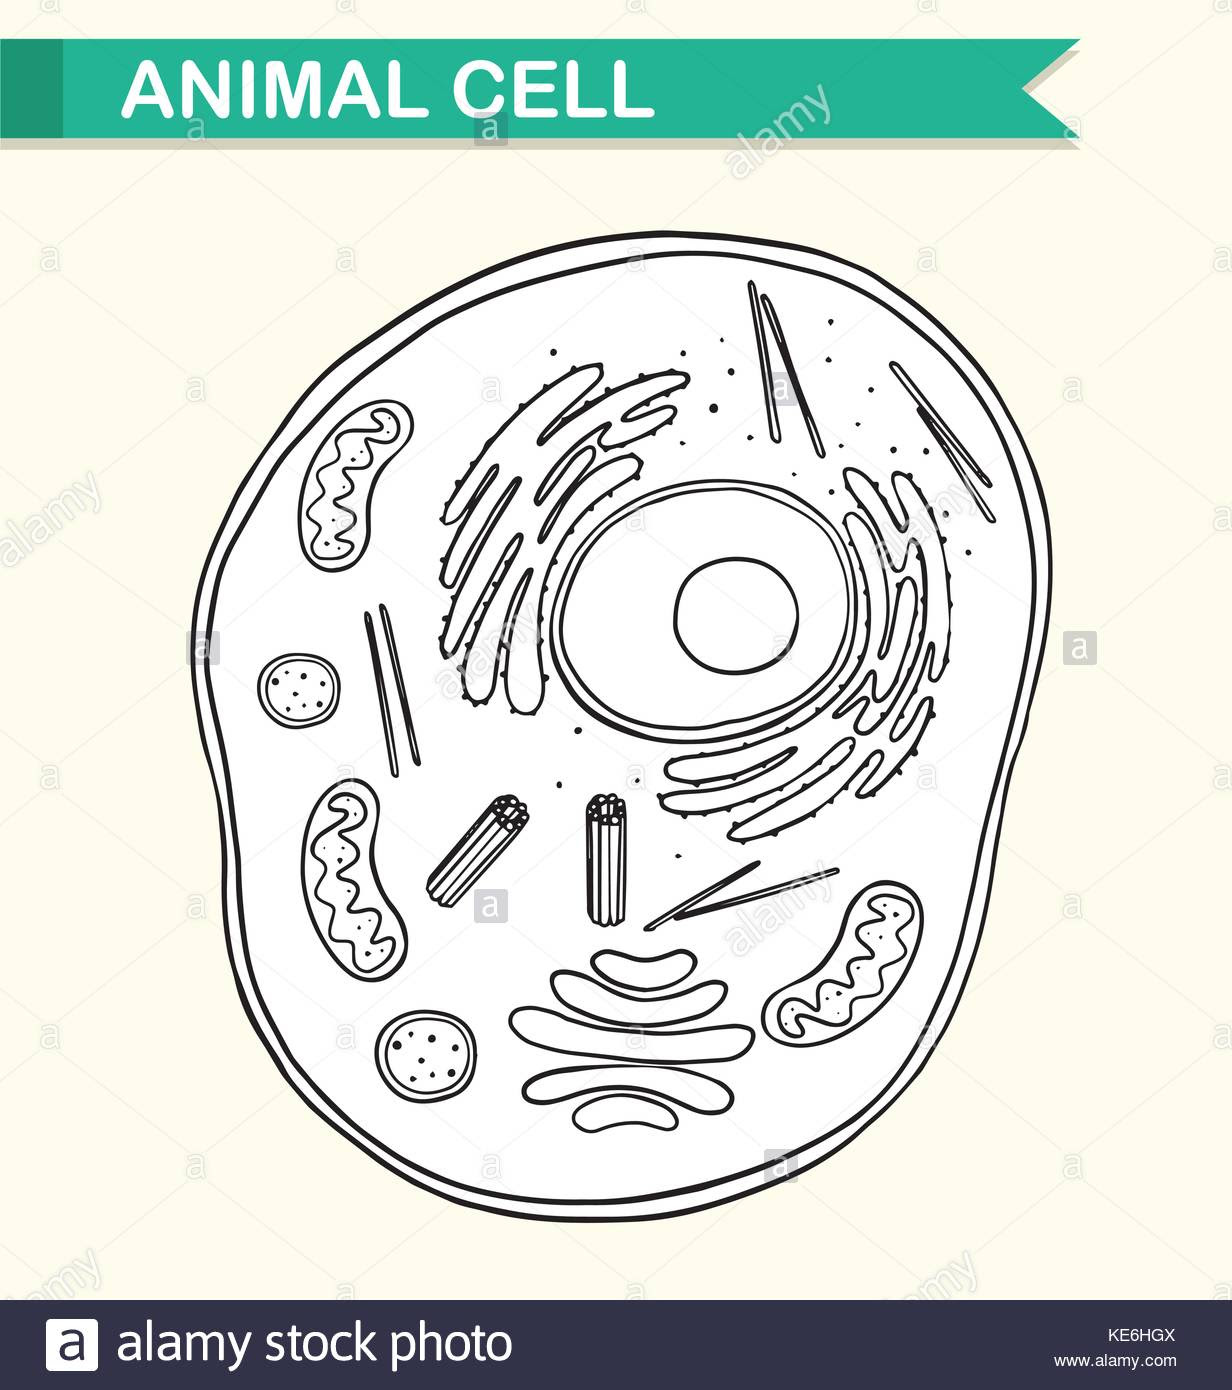 50+ Sketch Diagram Of Animal Cell Pics | Image of Diagram